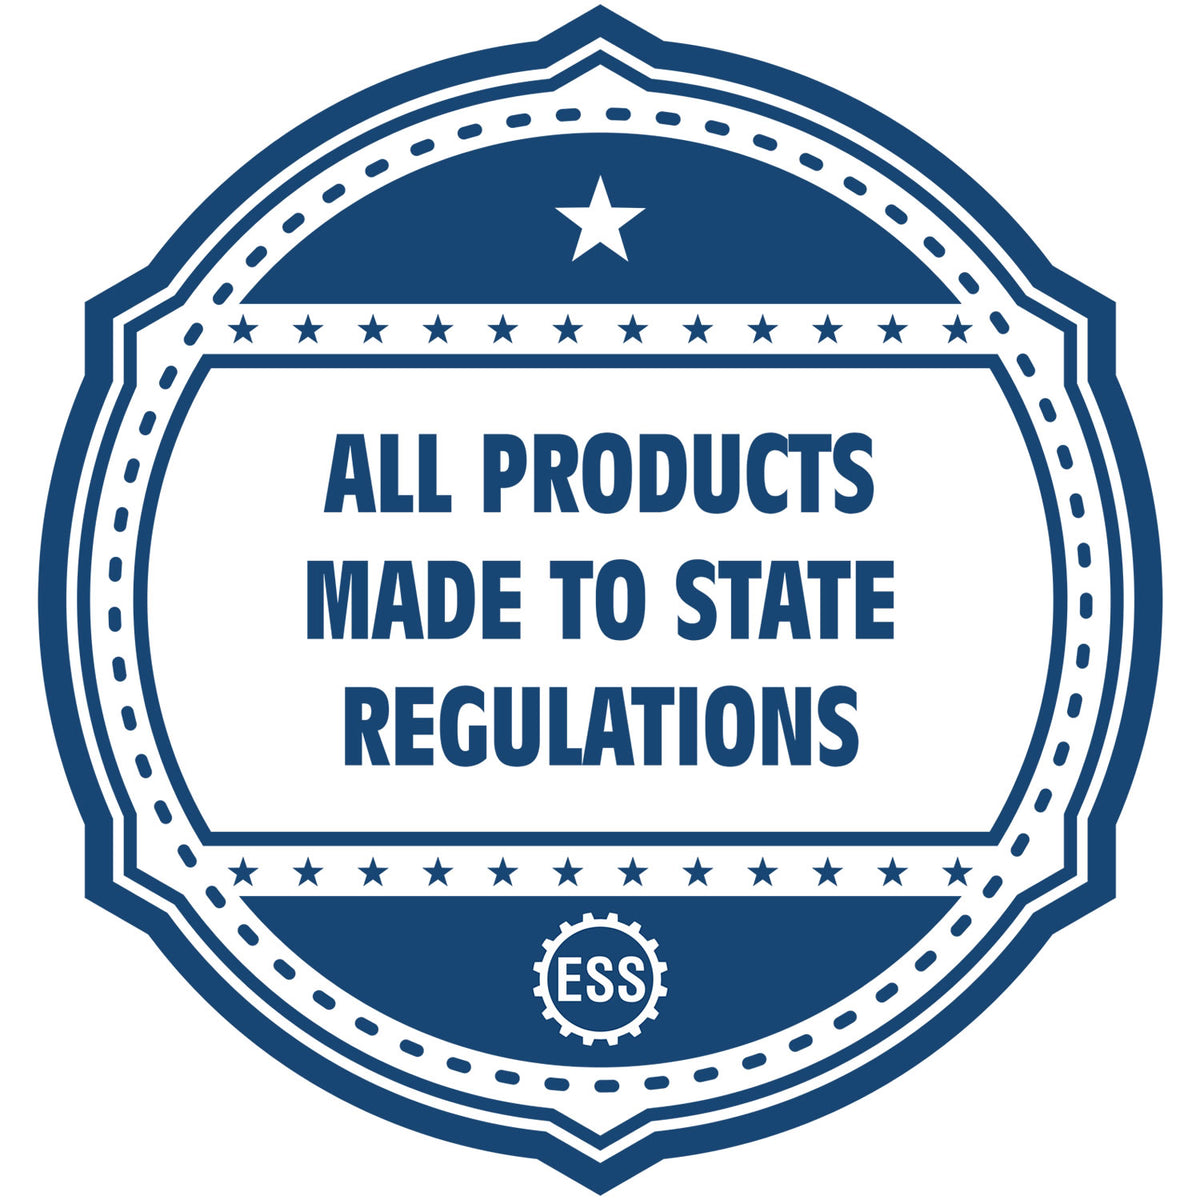 An icon or badge element for the Heavy-Duty Guam Rectangular Notary Stamp showing that this product is made in compliance with state regulations.